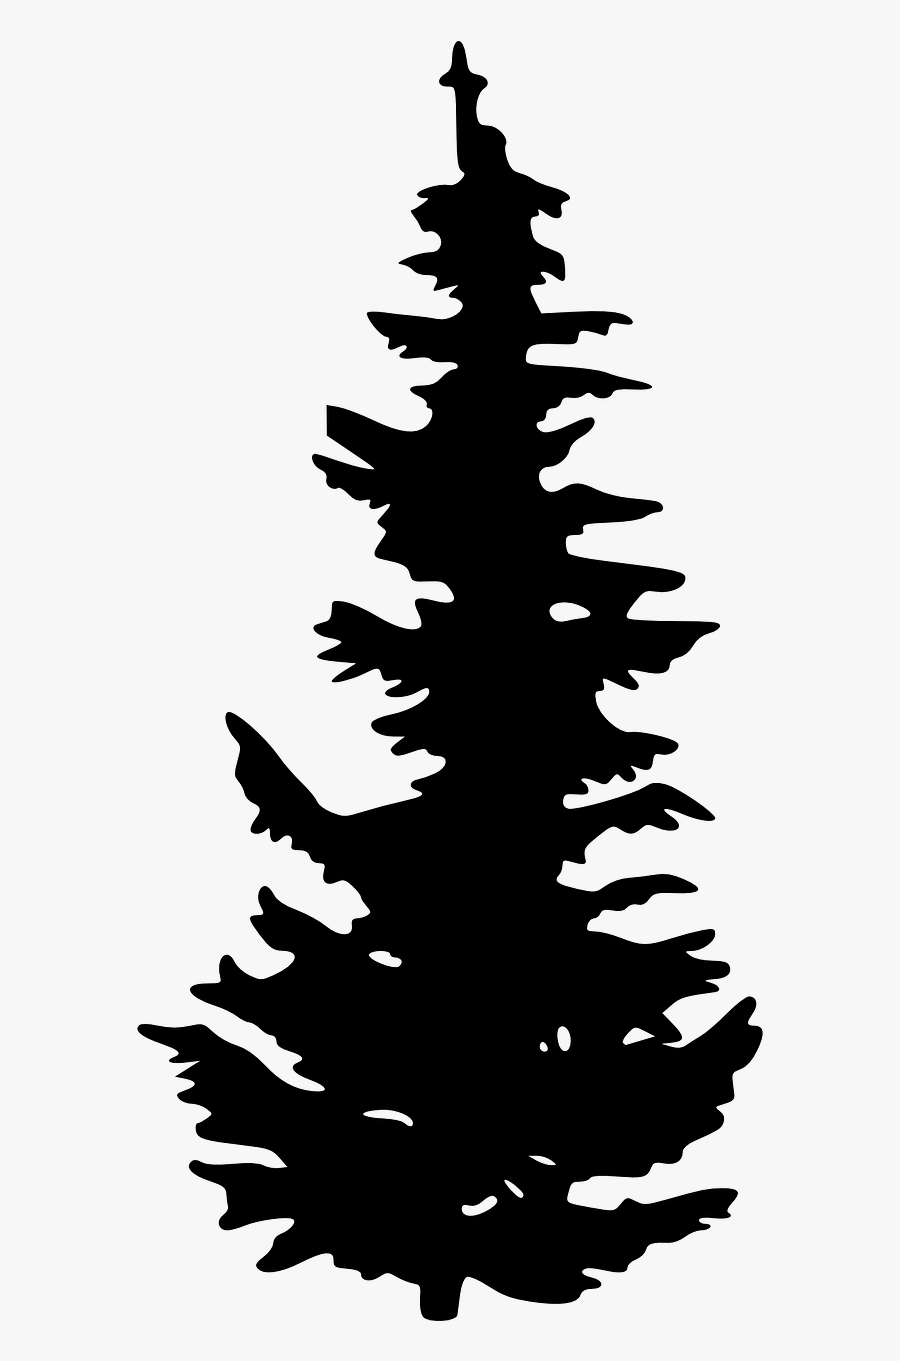 Evergreen Tree Silhouette, Transparent Clipart